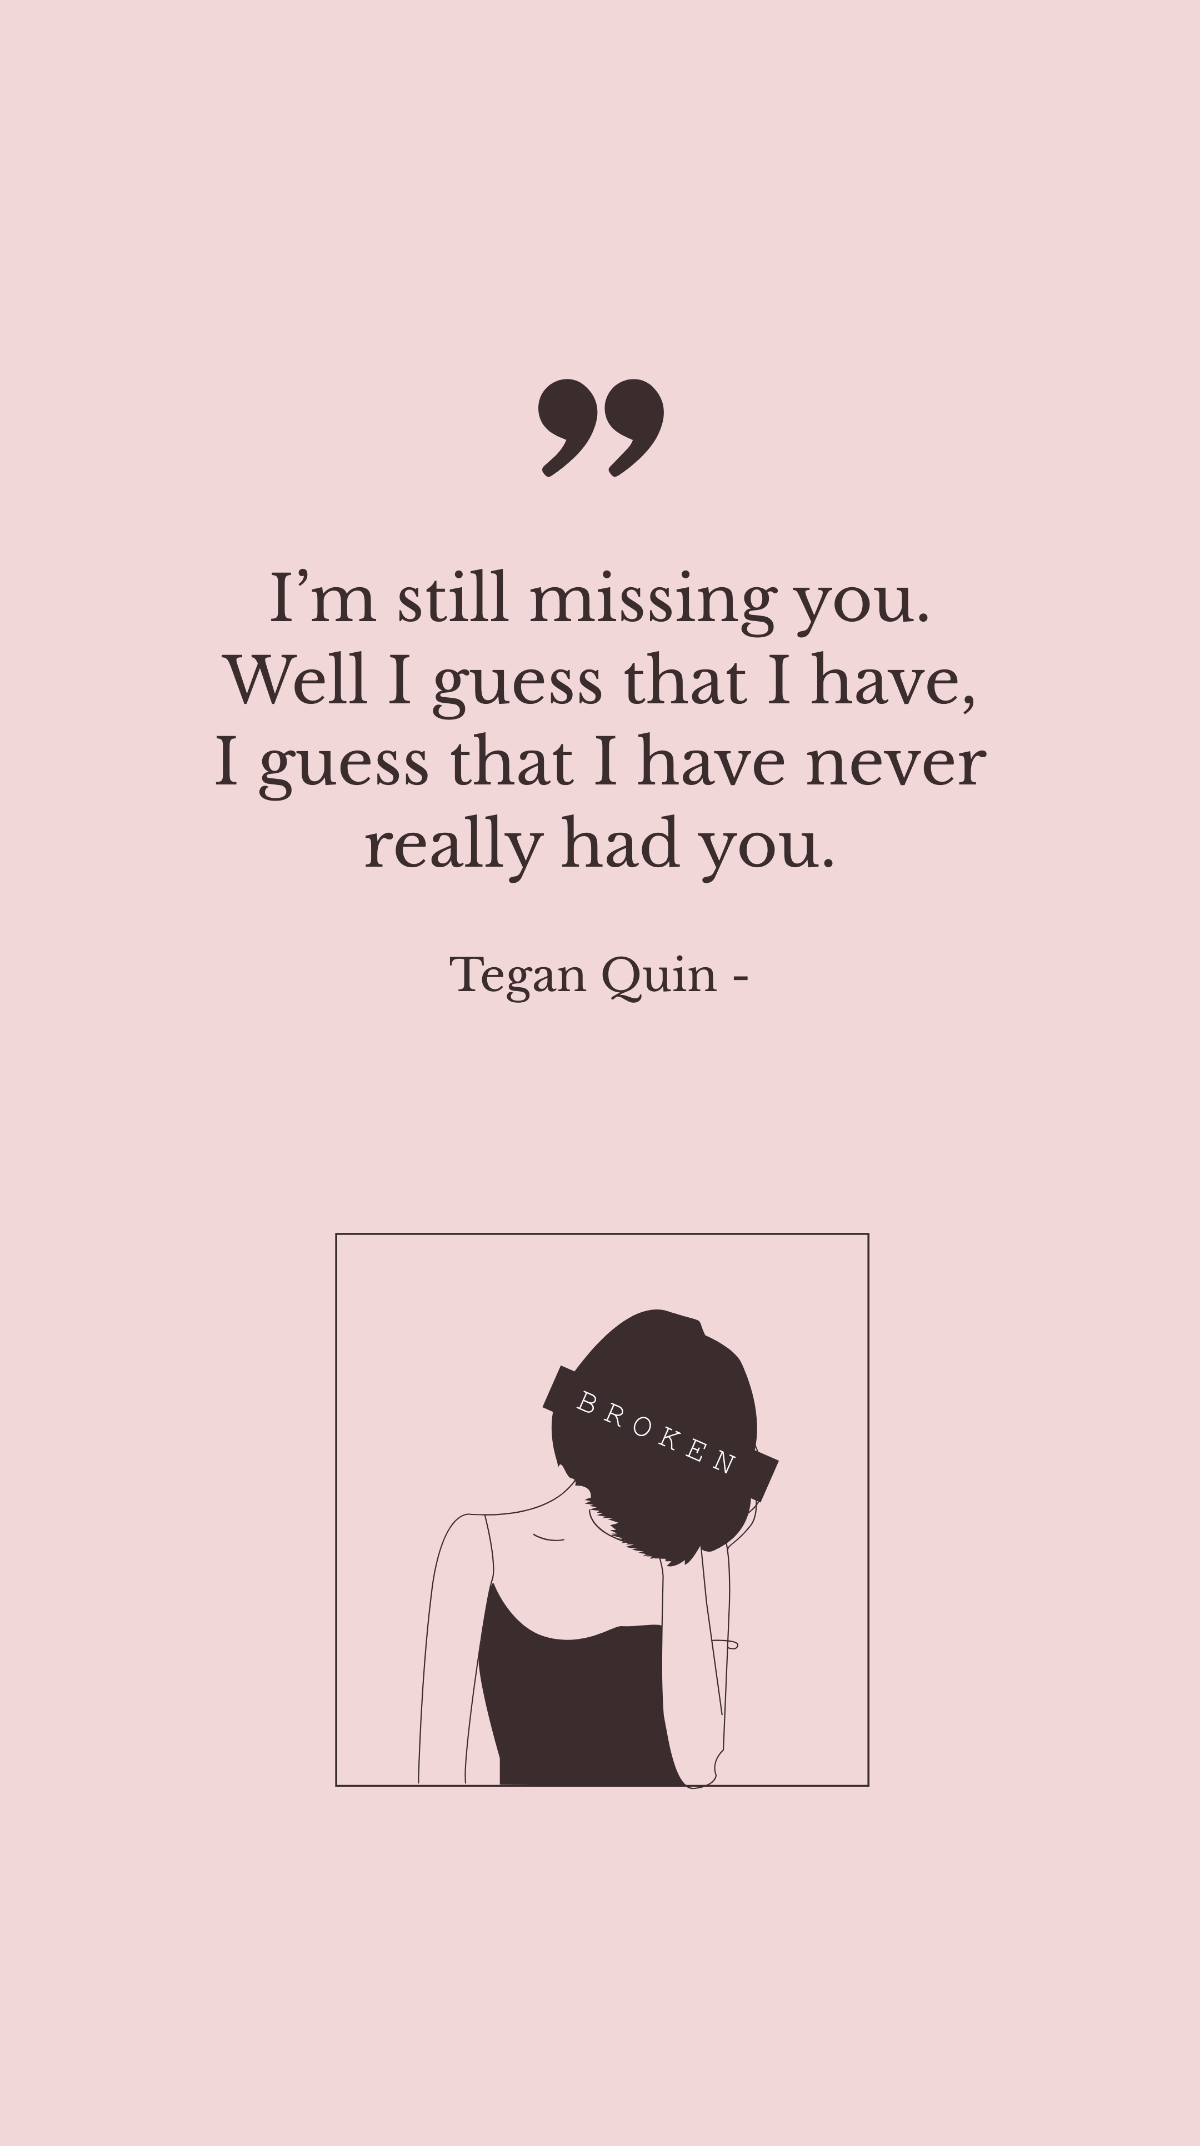 Tegan Quin - I’m still missing you. Well I guess that I have, I guess that I have never really had you. Template